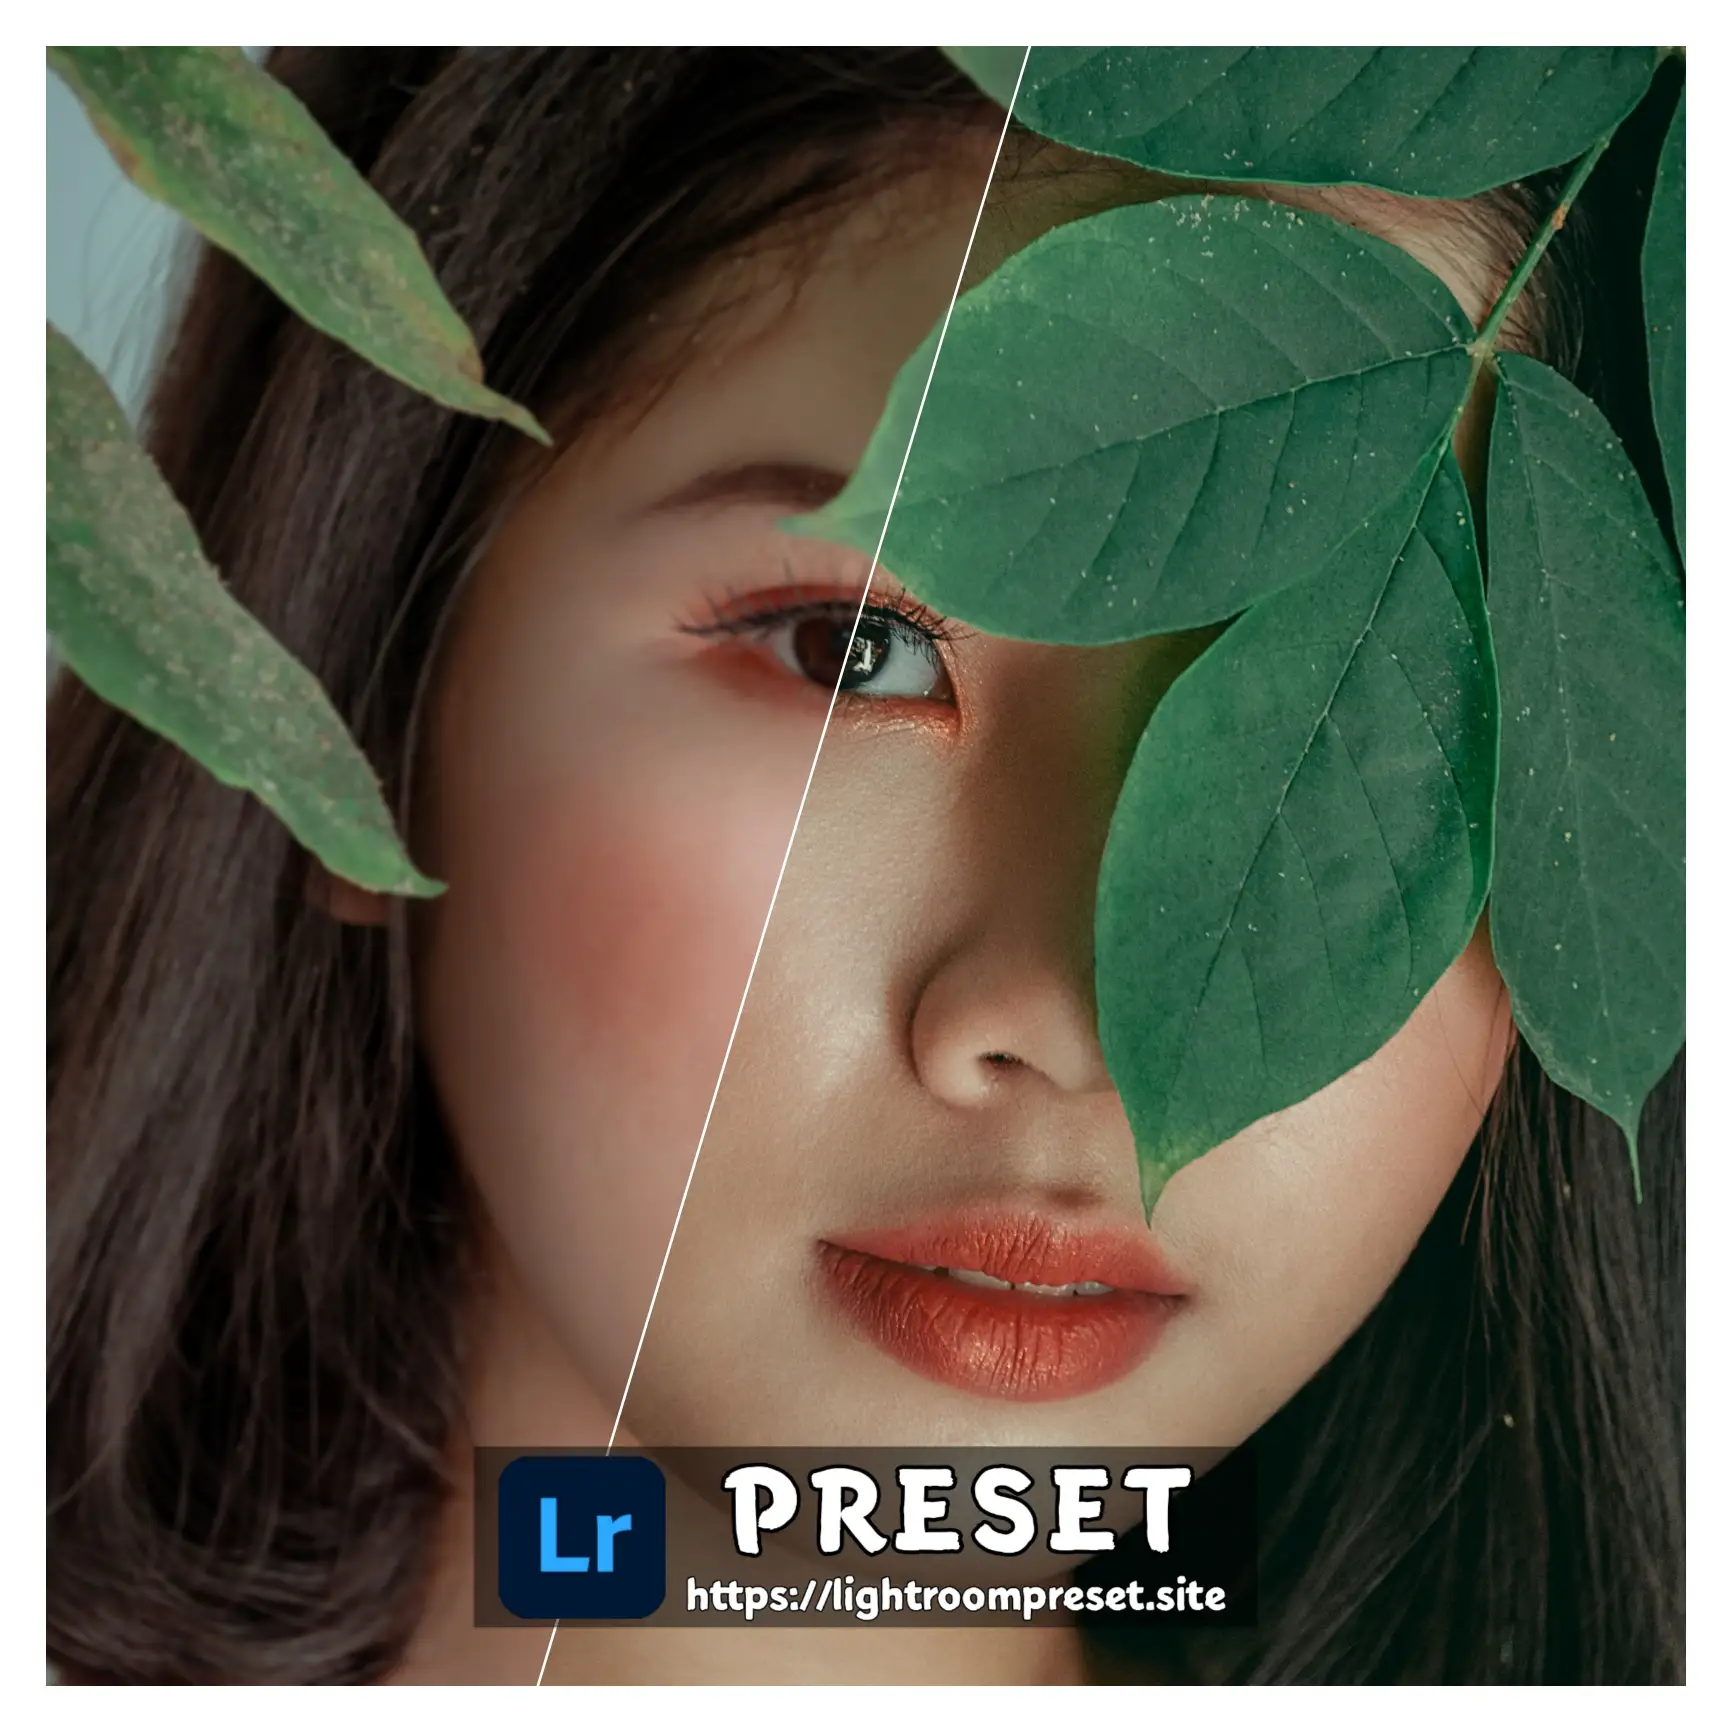 You are currently viewing Leica lightroom presets download free